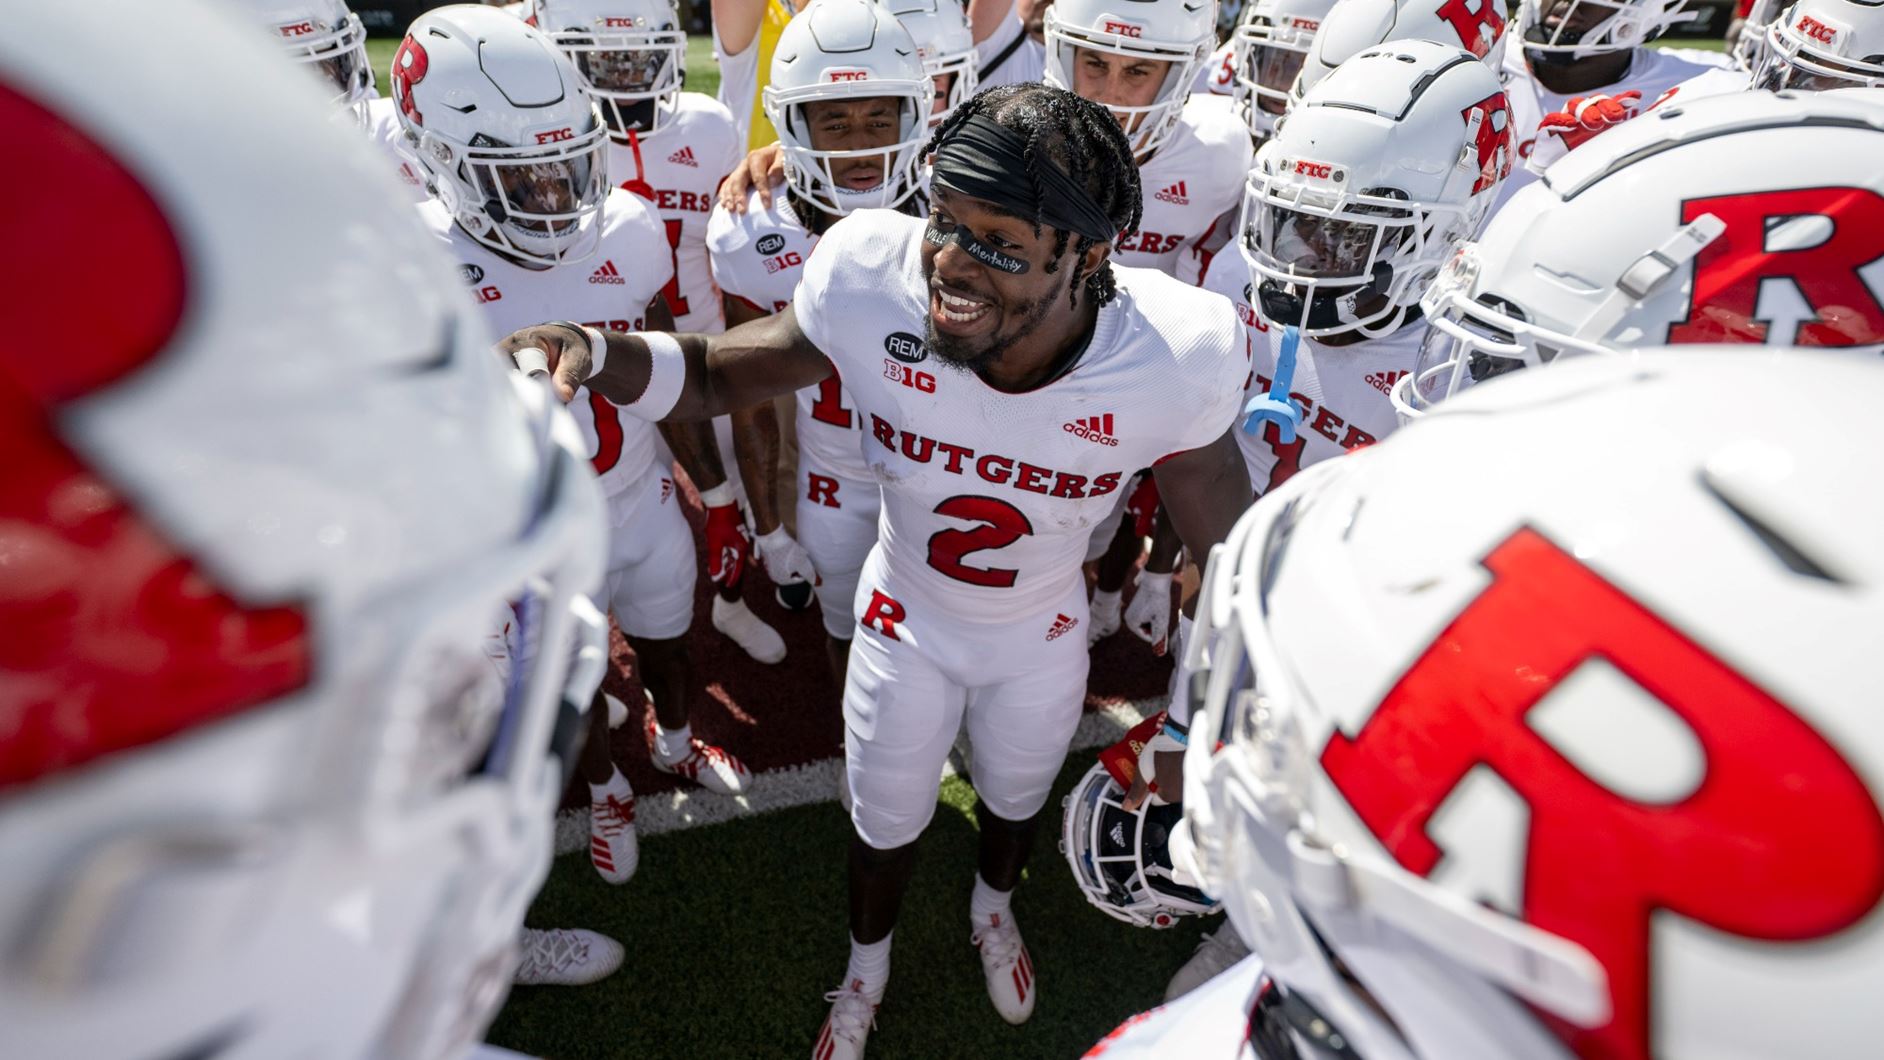 Game Preview: Rutgers at Temple